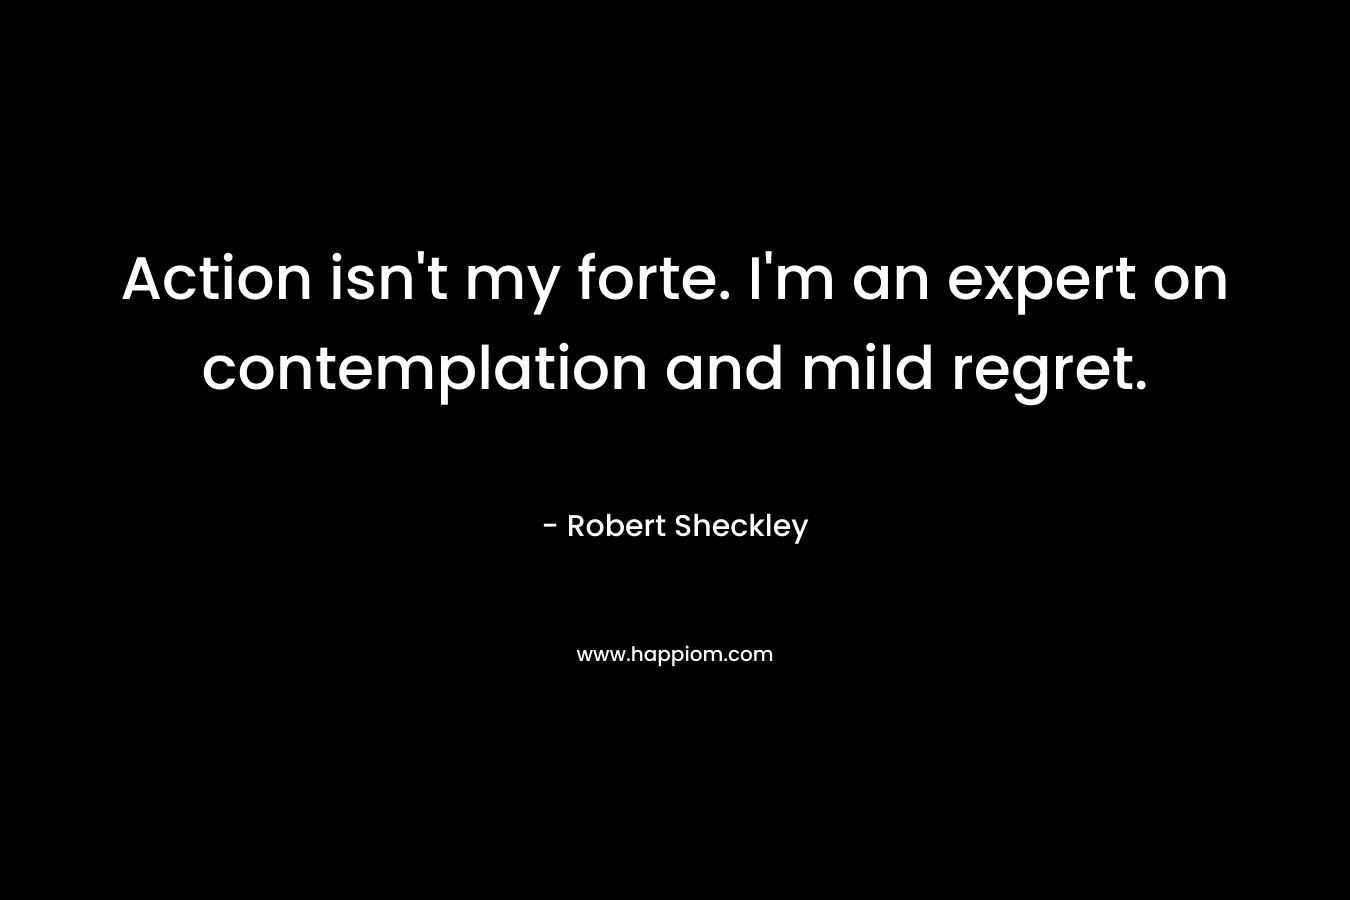 Action isn’t my forte. I’m an expert on contemplation and mild regret. – Robert Sheckley